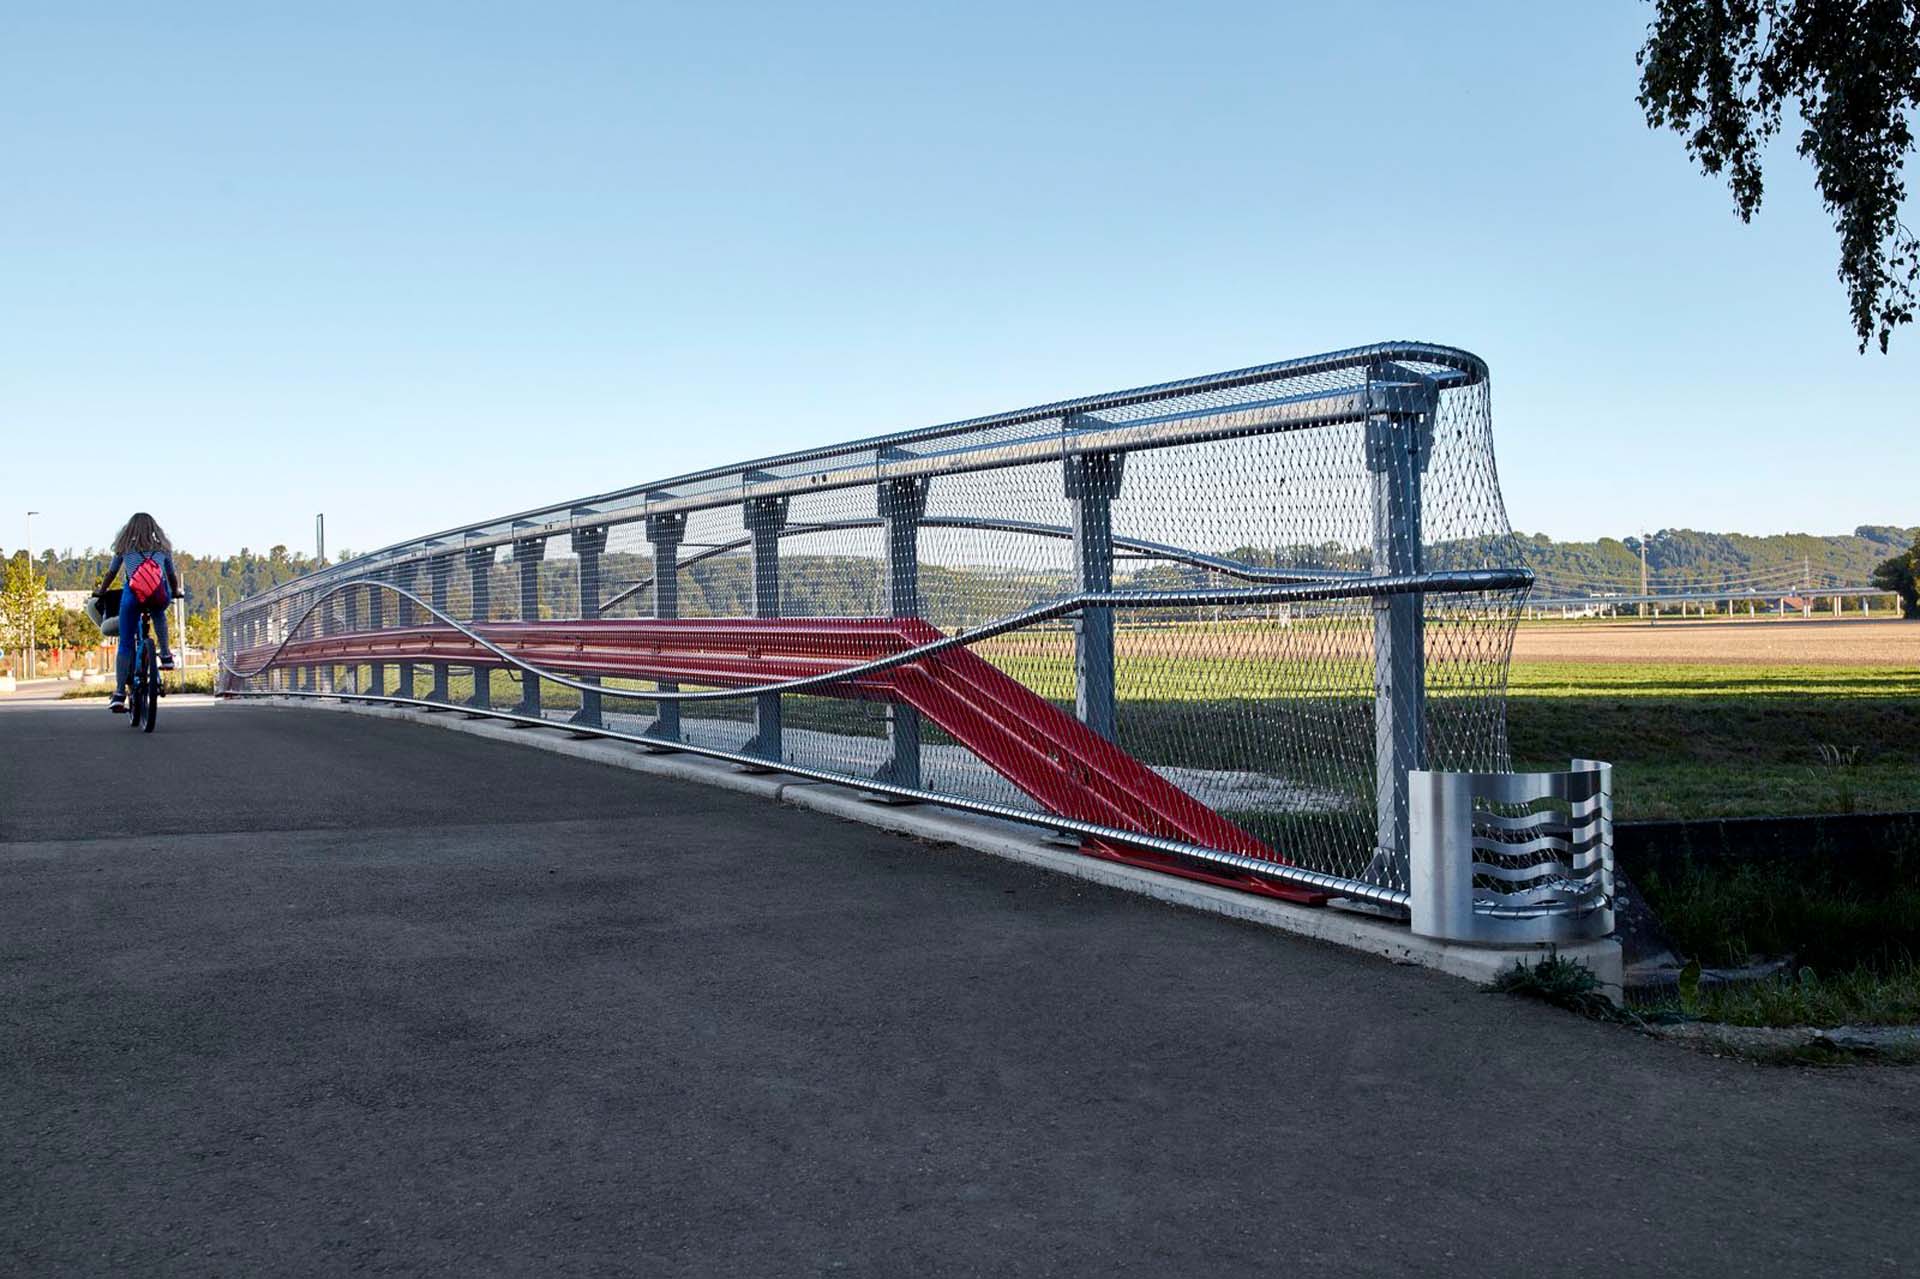 Webnet covers the railings on both sides of the bridge. It serves not only as a railing infill, but lets the striking red crash barriers and the curved steel railings shine.